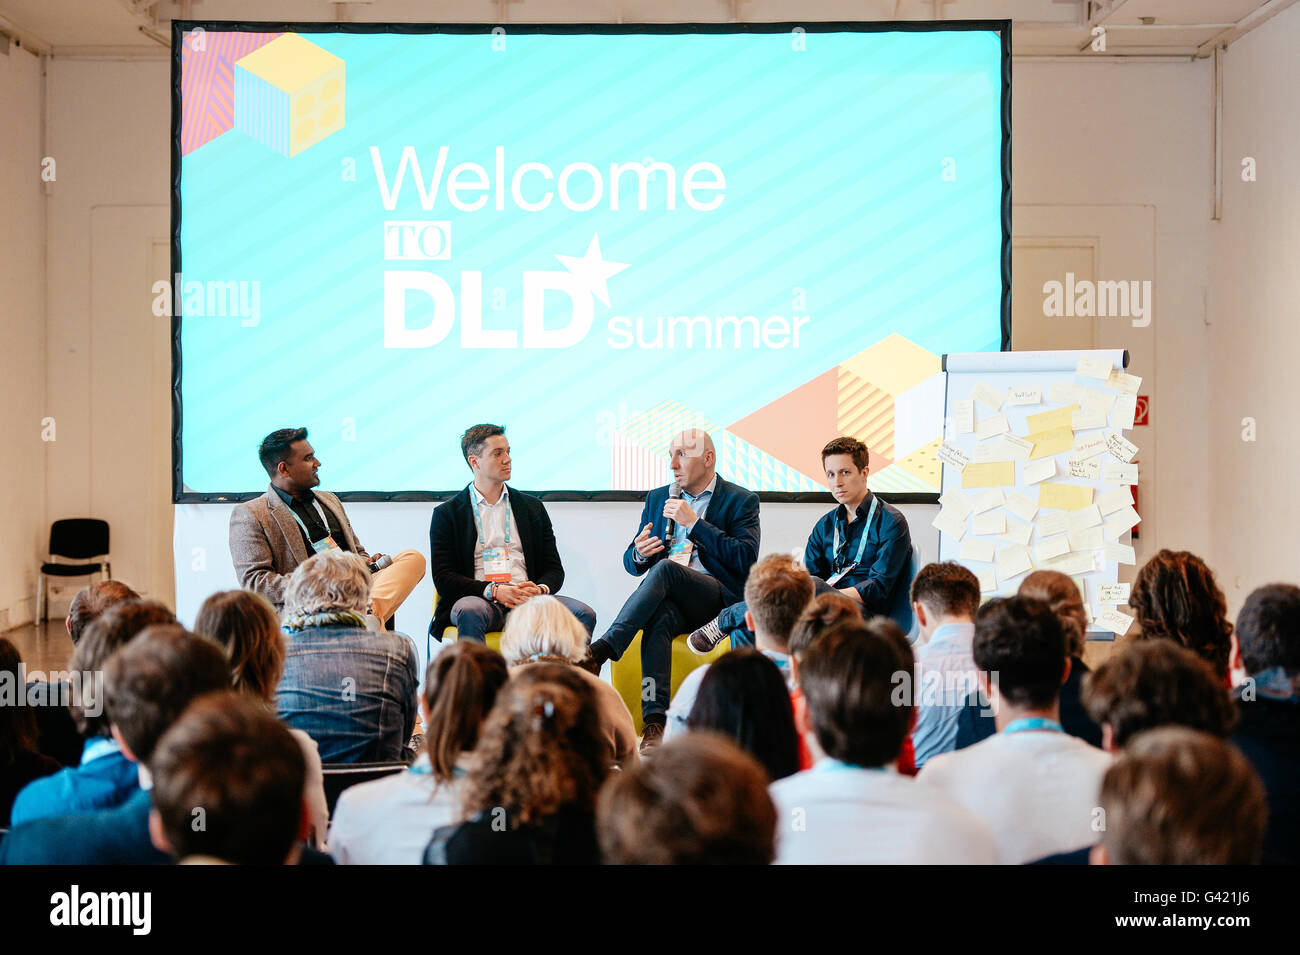 MUNICH/GERMANY - JUNE 16: Daniel Ramamoorthy (Serial Entrepreneur), Felix Reinshagen (NavVis), Sven Scheuble (Siemens TTB), Daniel Strohmayr (tacterion) talk togehter onstage during the DLDsummer Conference 2016 at Haus der Kunst, Munich. DLDsummer takes place June 16-17, 2016 and focuses on the changing through digitalization in the areas of life, work and business (Photo: picture alliance for DLD/Jan Haas) | usage worldwide Stock Photo